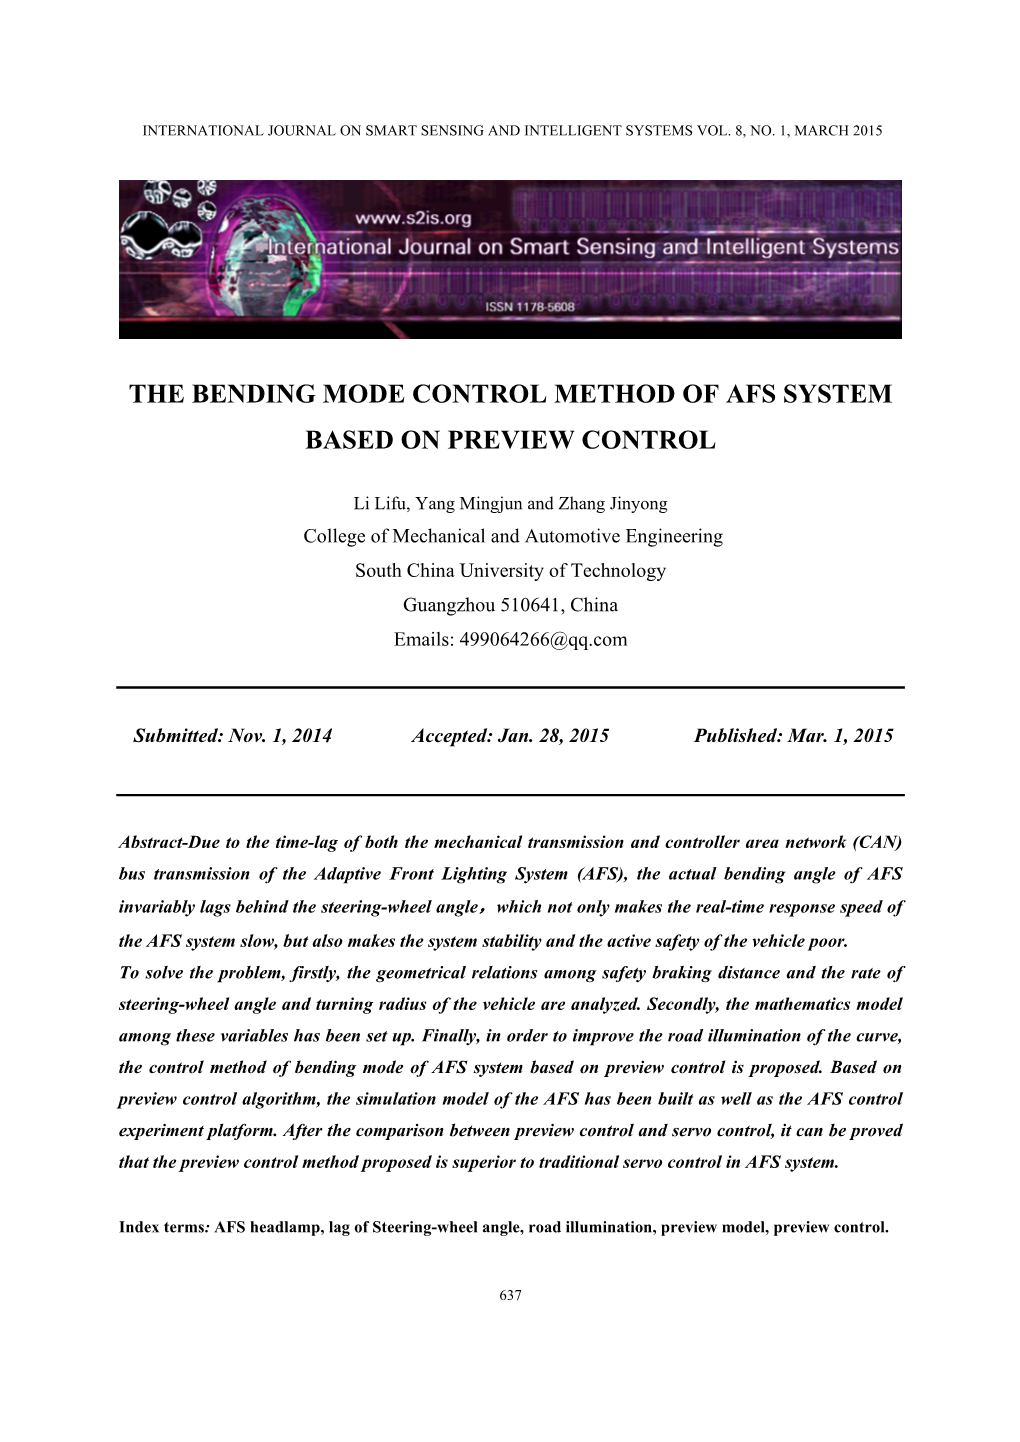 The Bending Mode Control Method of Afs System Based on Preview Control